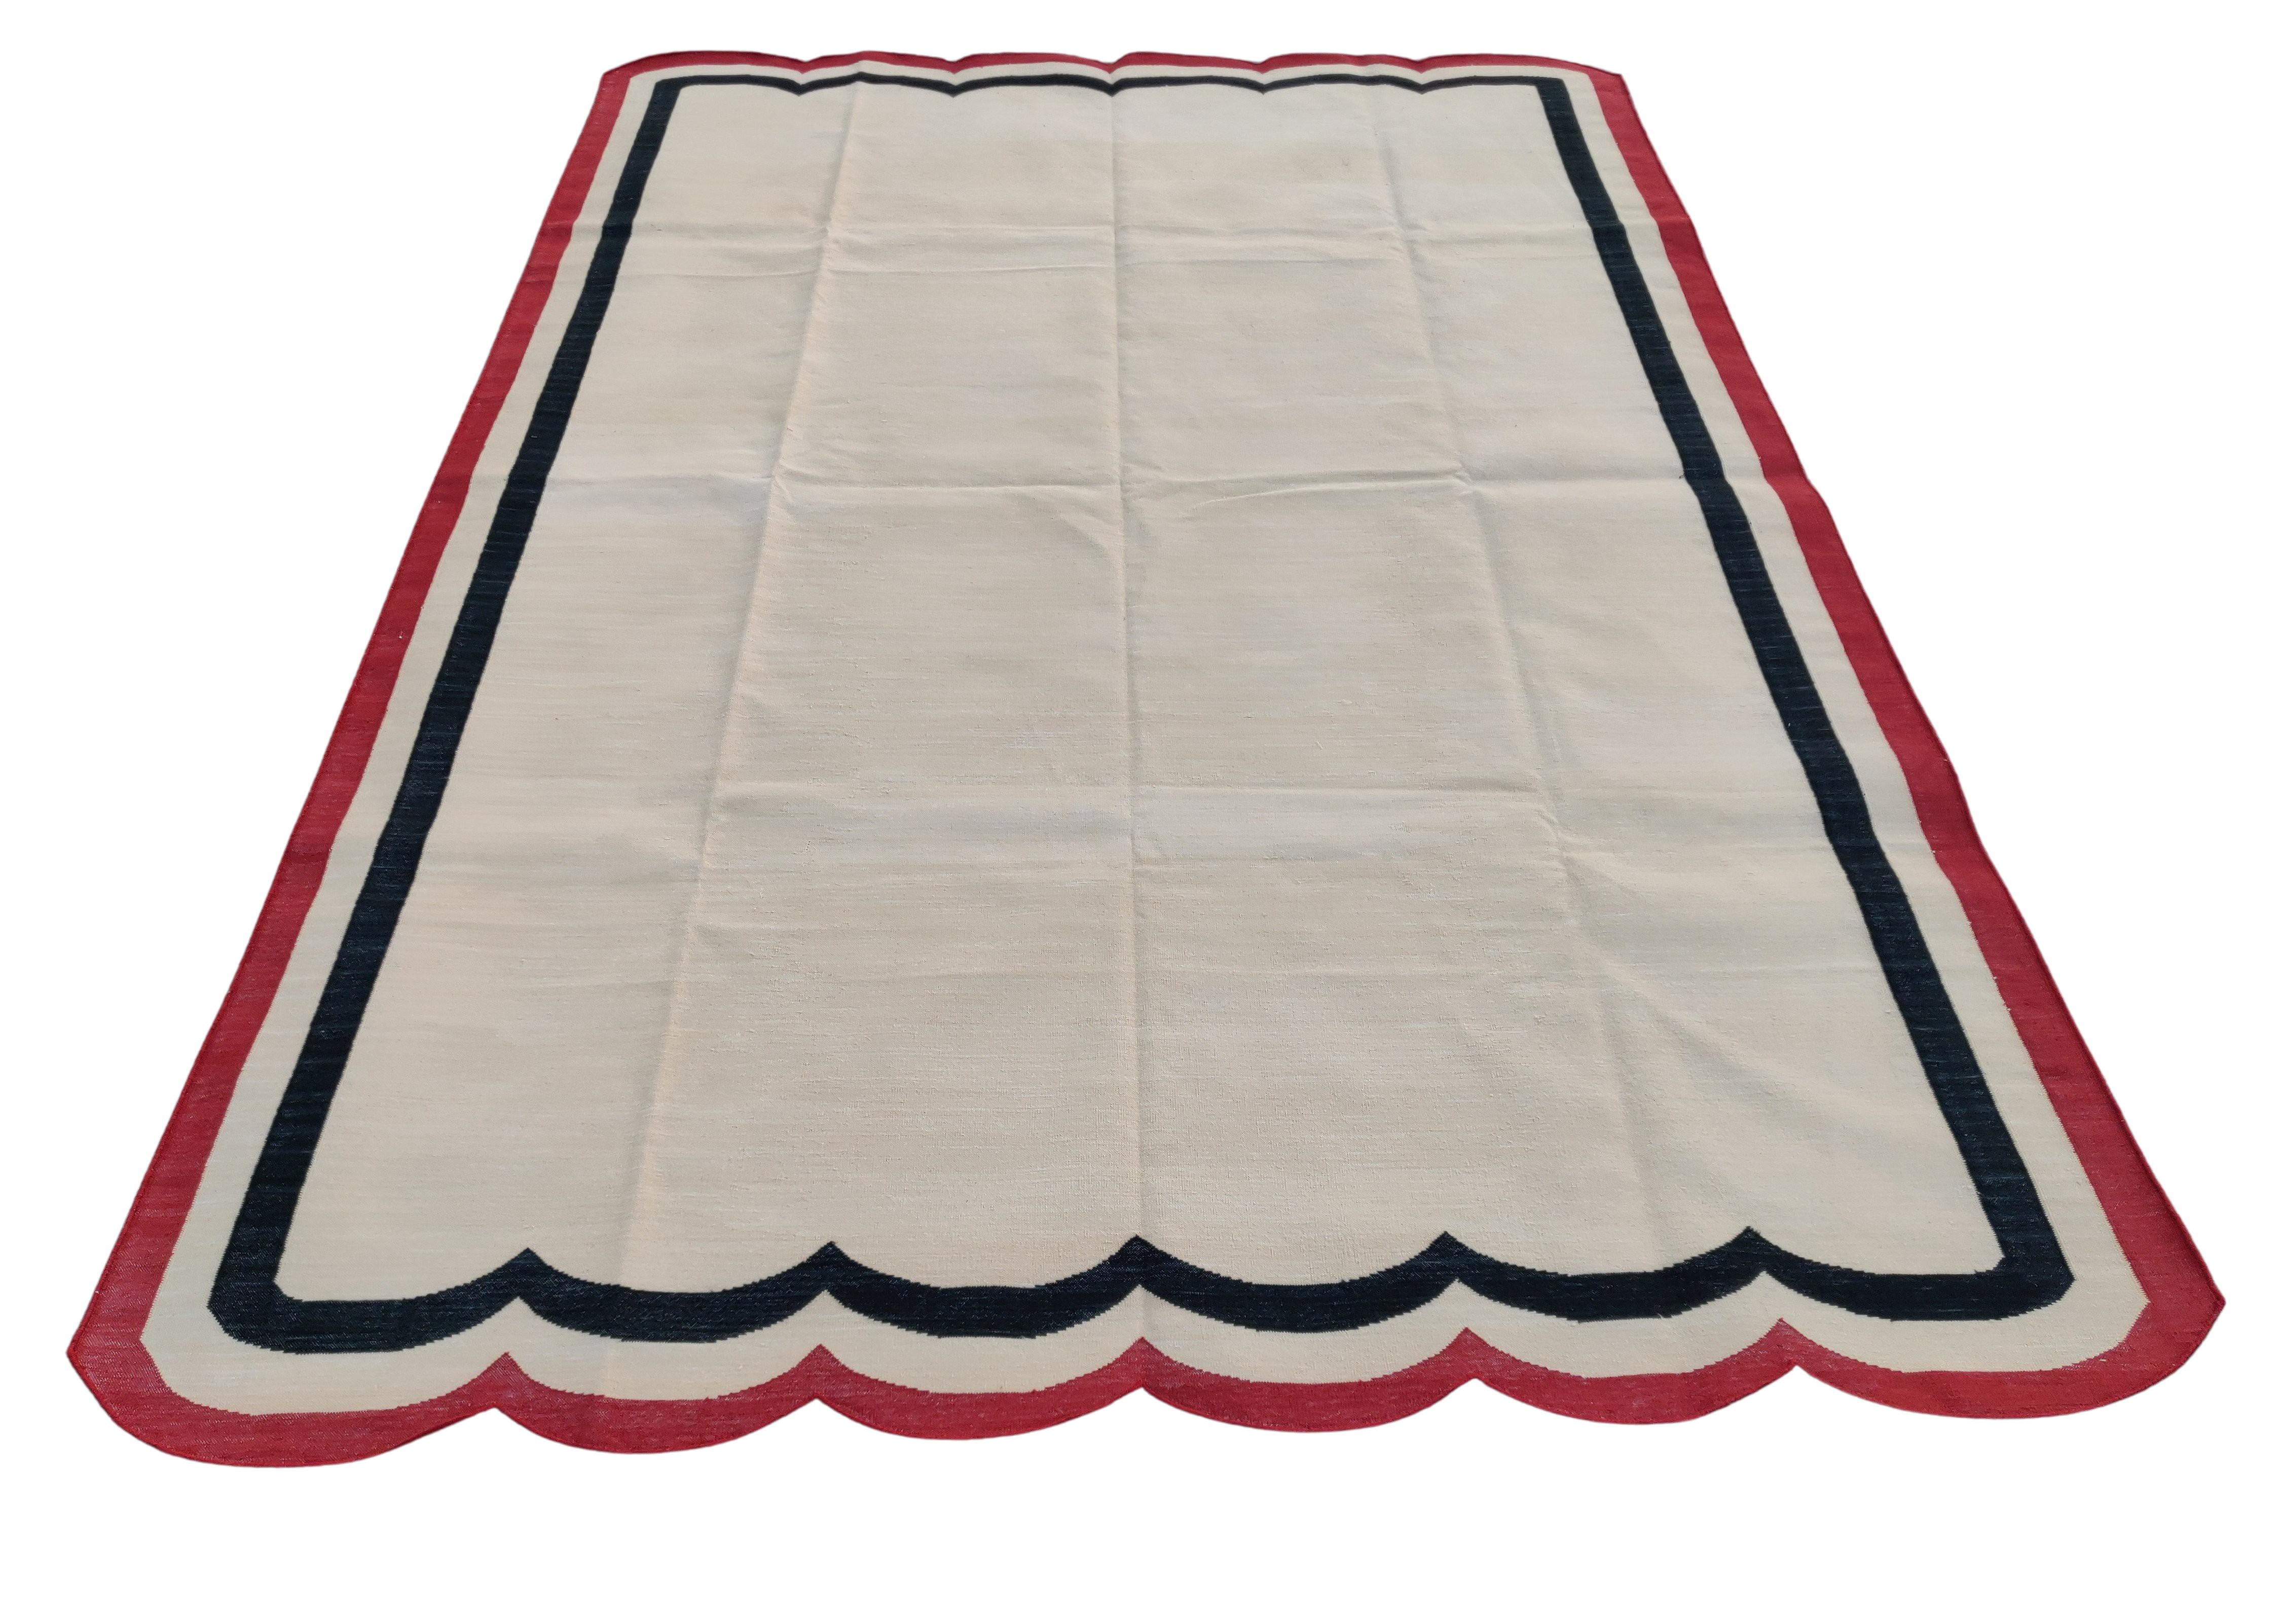 Contemporary Handmade Cotton Area Flat Weave Rug, 6x9 Cream And Red Scalloped Kilim Dhurrie For Sale